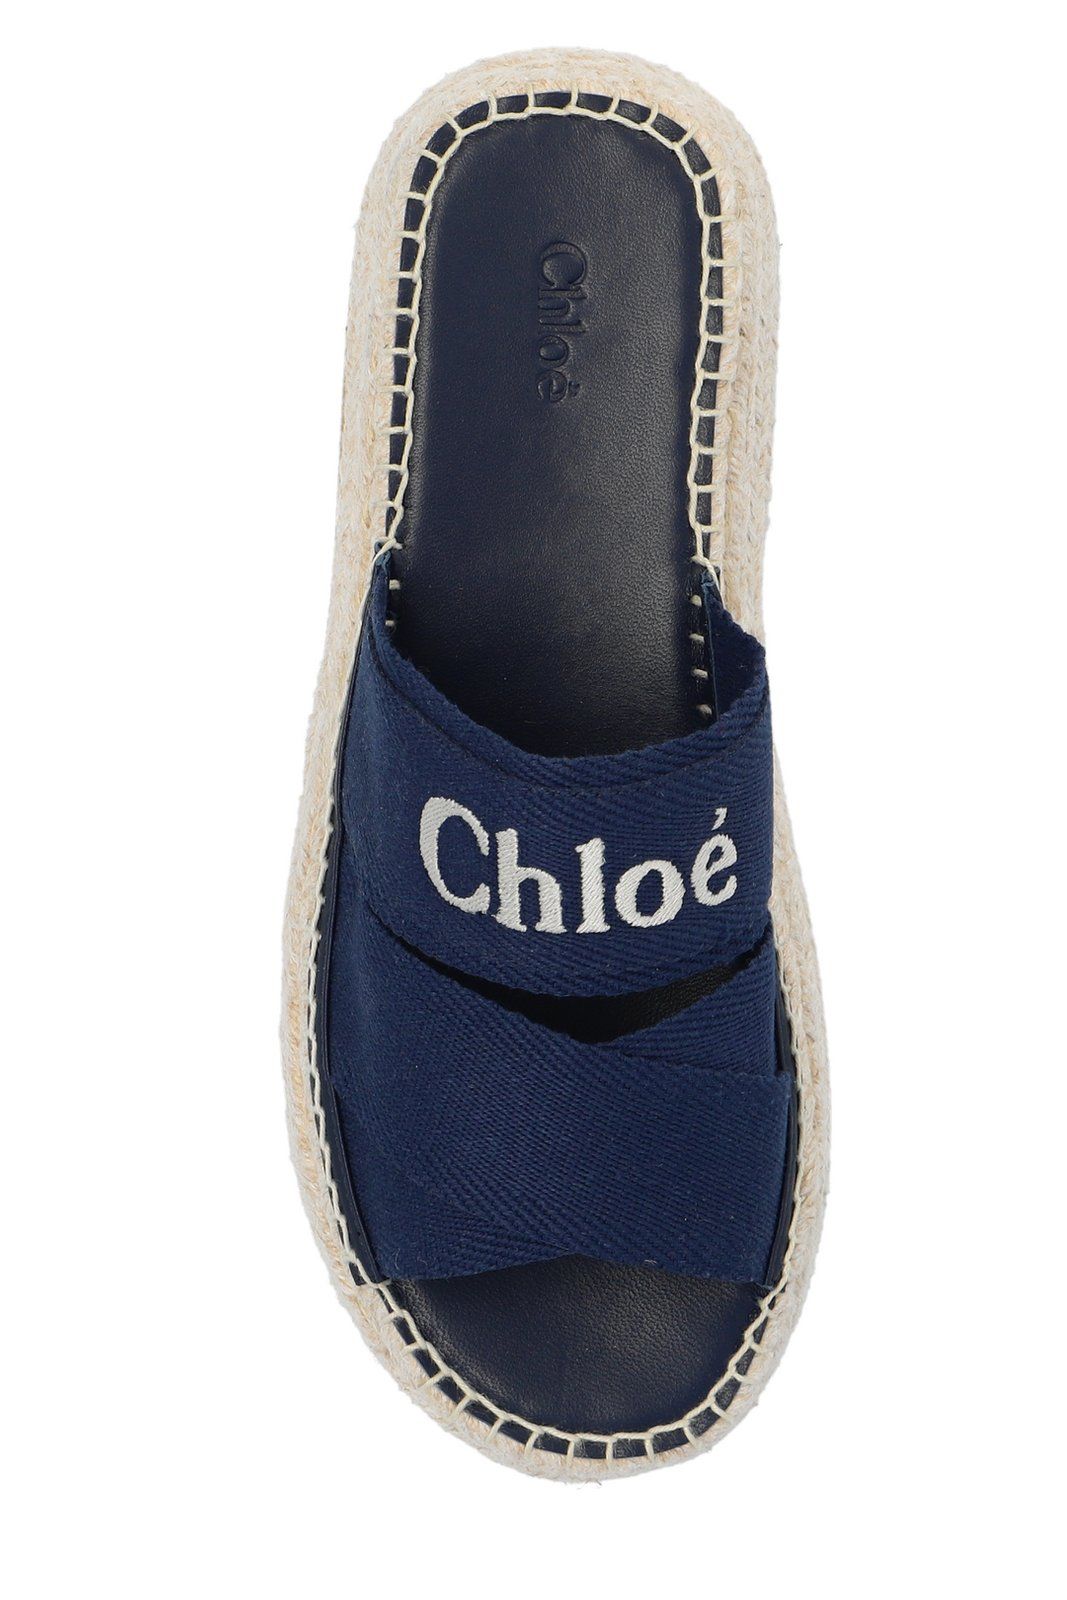 Chloé Mila Logo Embroidered Sandals | Cettire Global